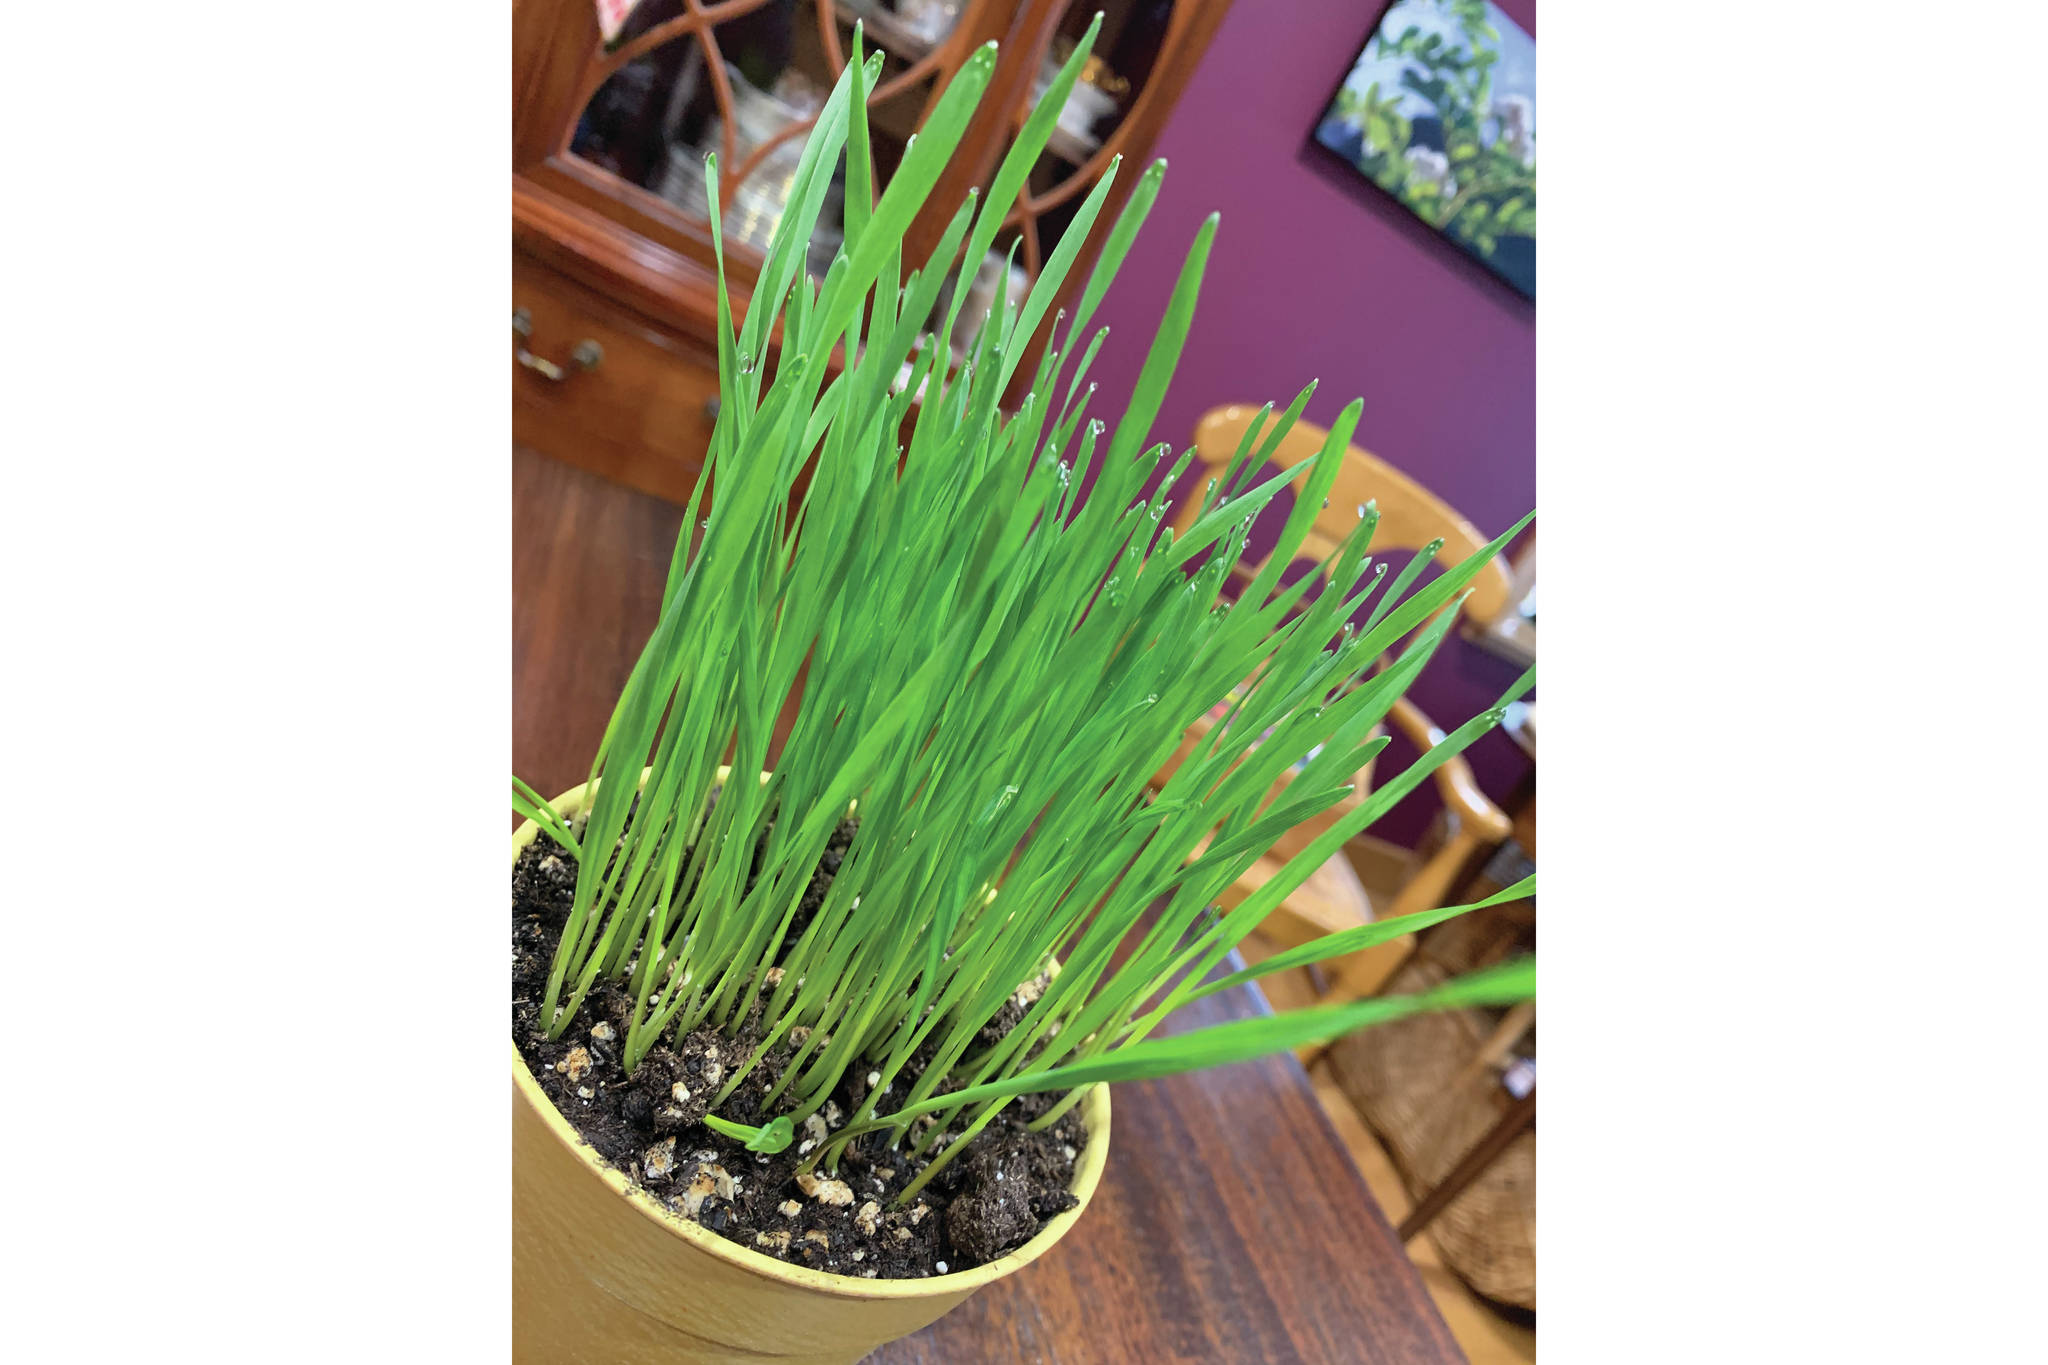 Wheat grass offers a bright spot of green in an otherwise very snowy March on March 5, 2021, in the Kachemak Gardener's home in Homer, Alaska. (Photo by Rosemary Fitzpatrick)